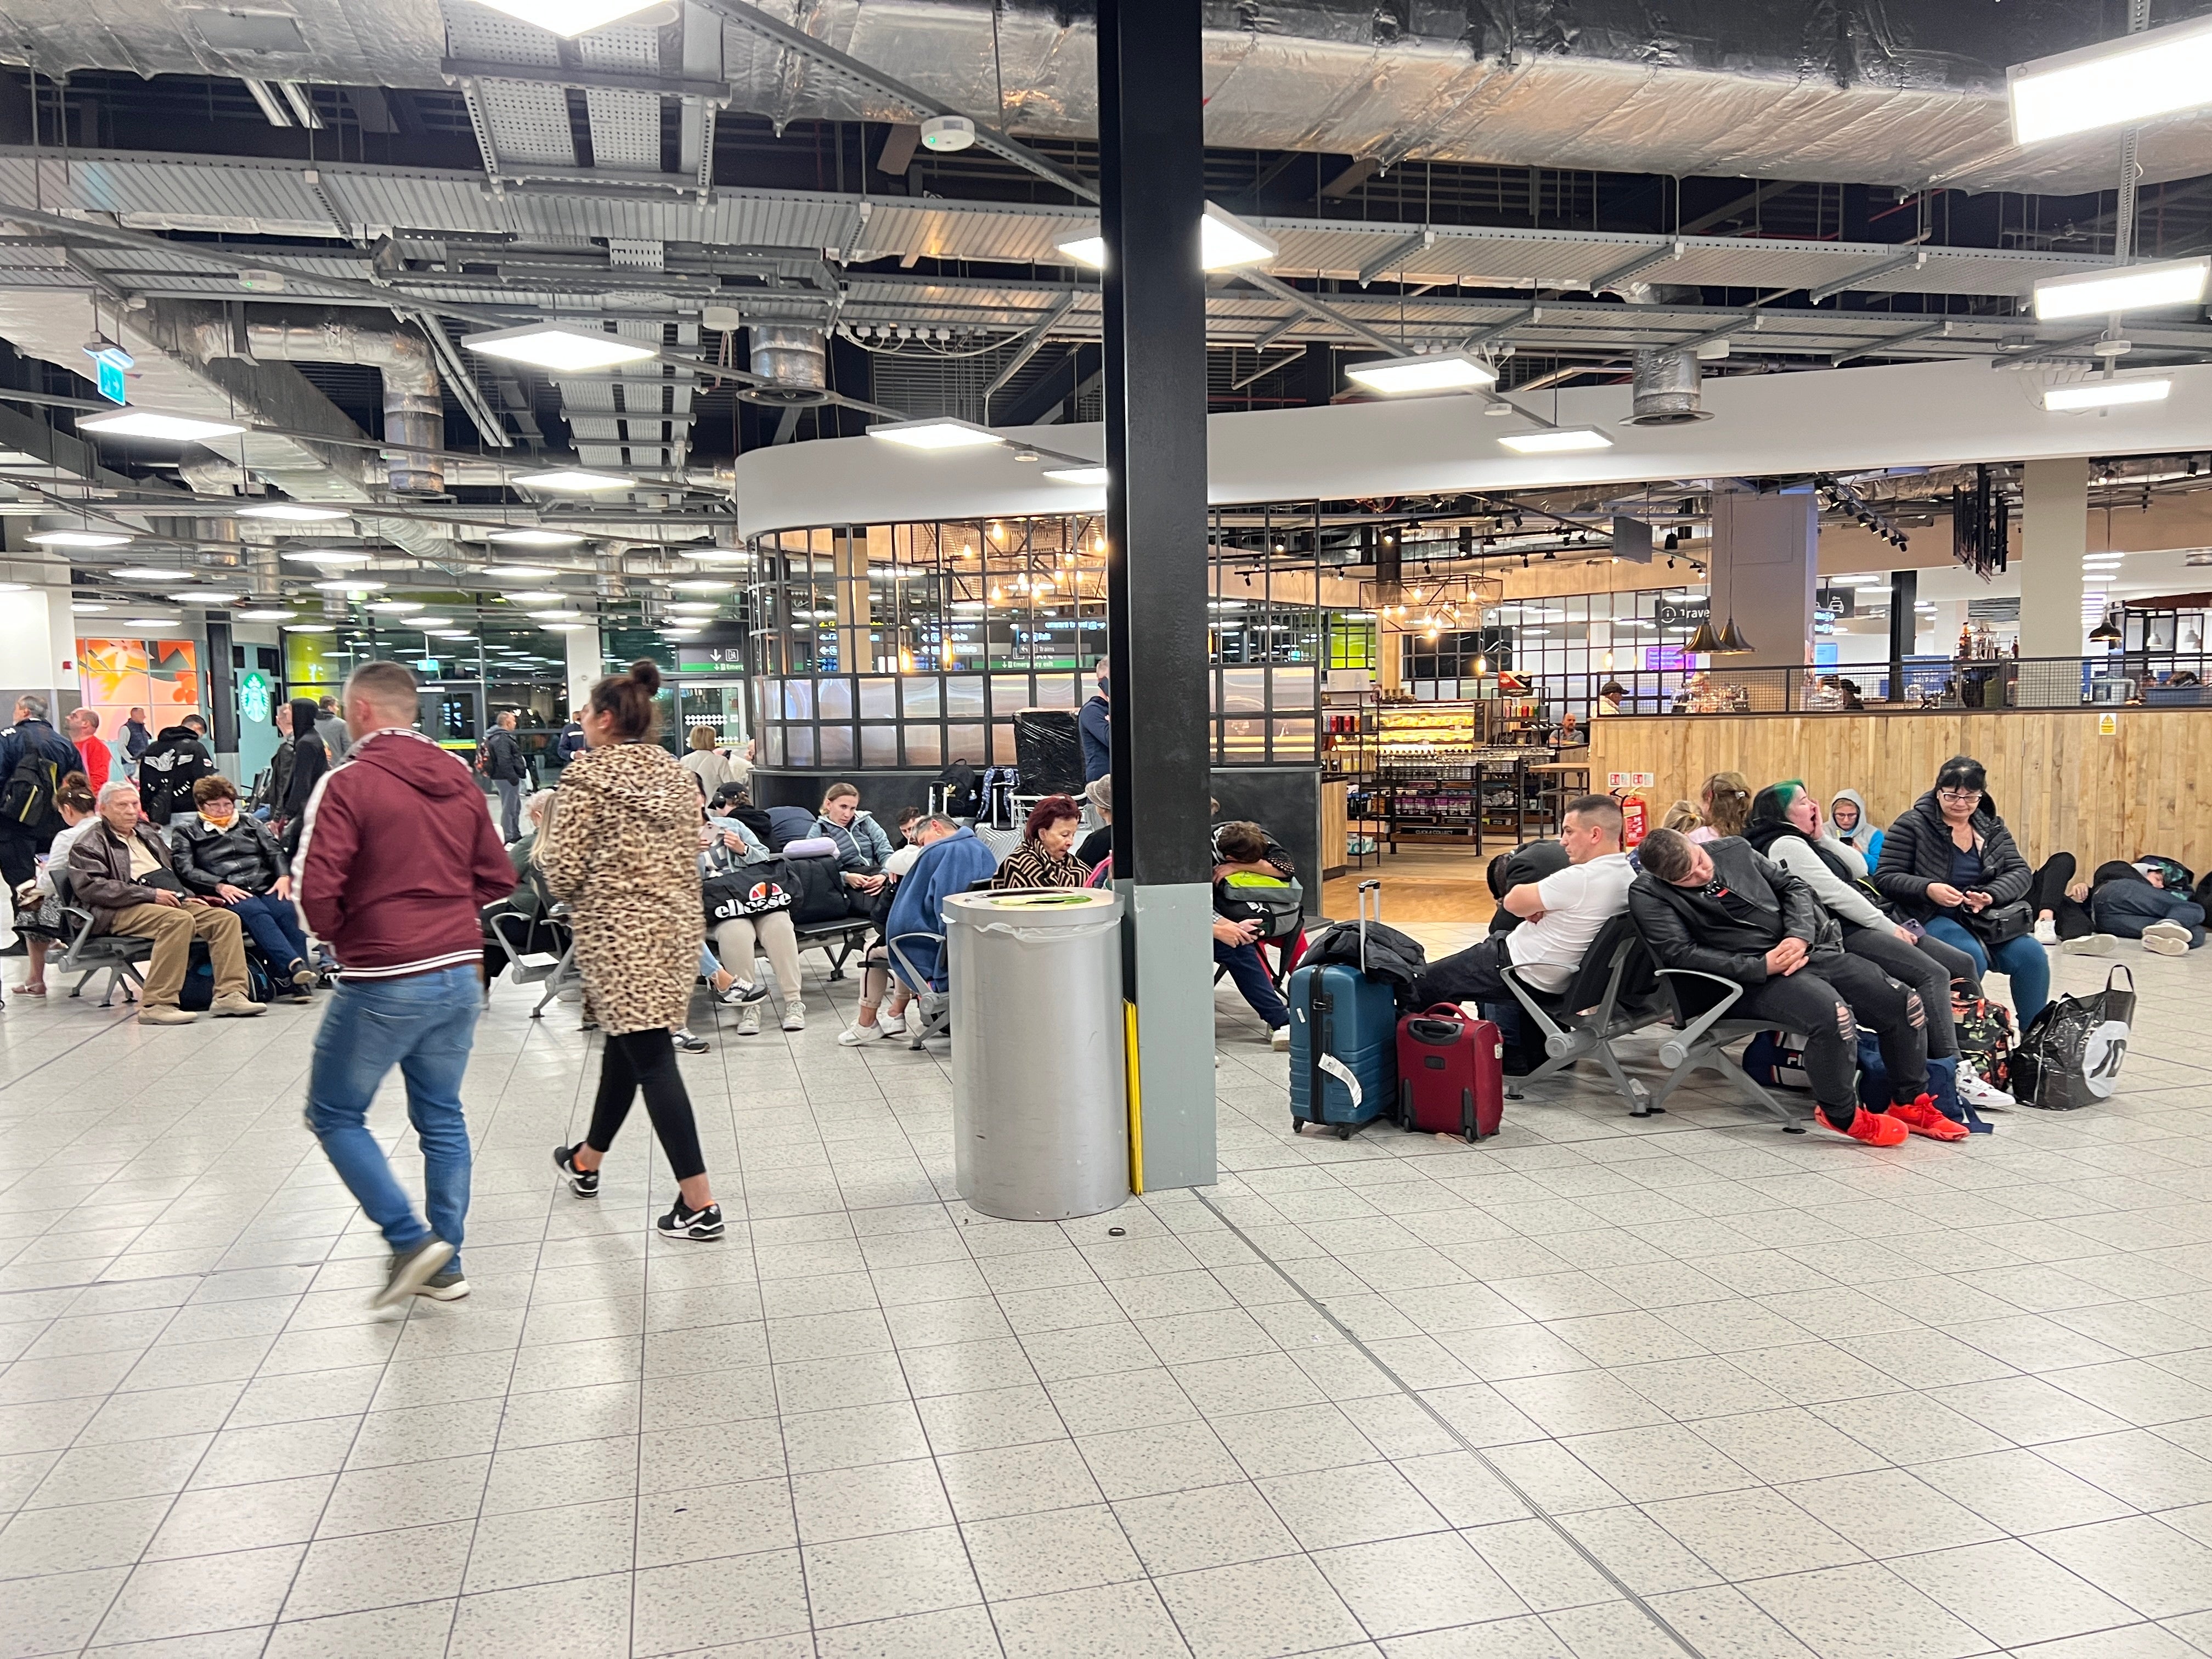 Passengers wait at Luton Airport after flights cancelled until Wednesday afternoon